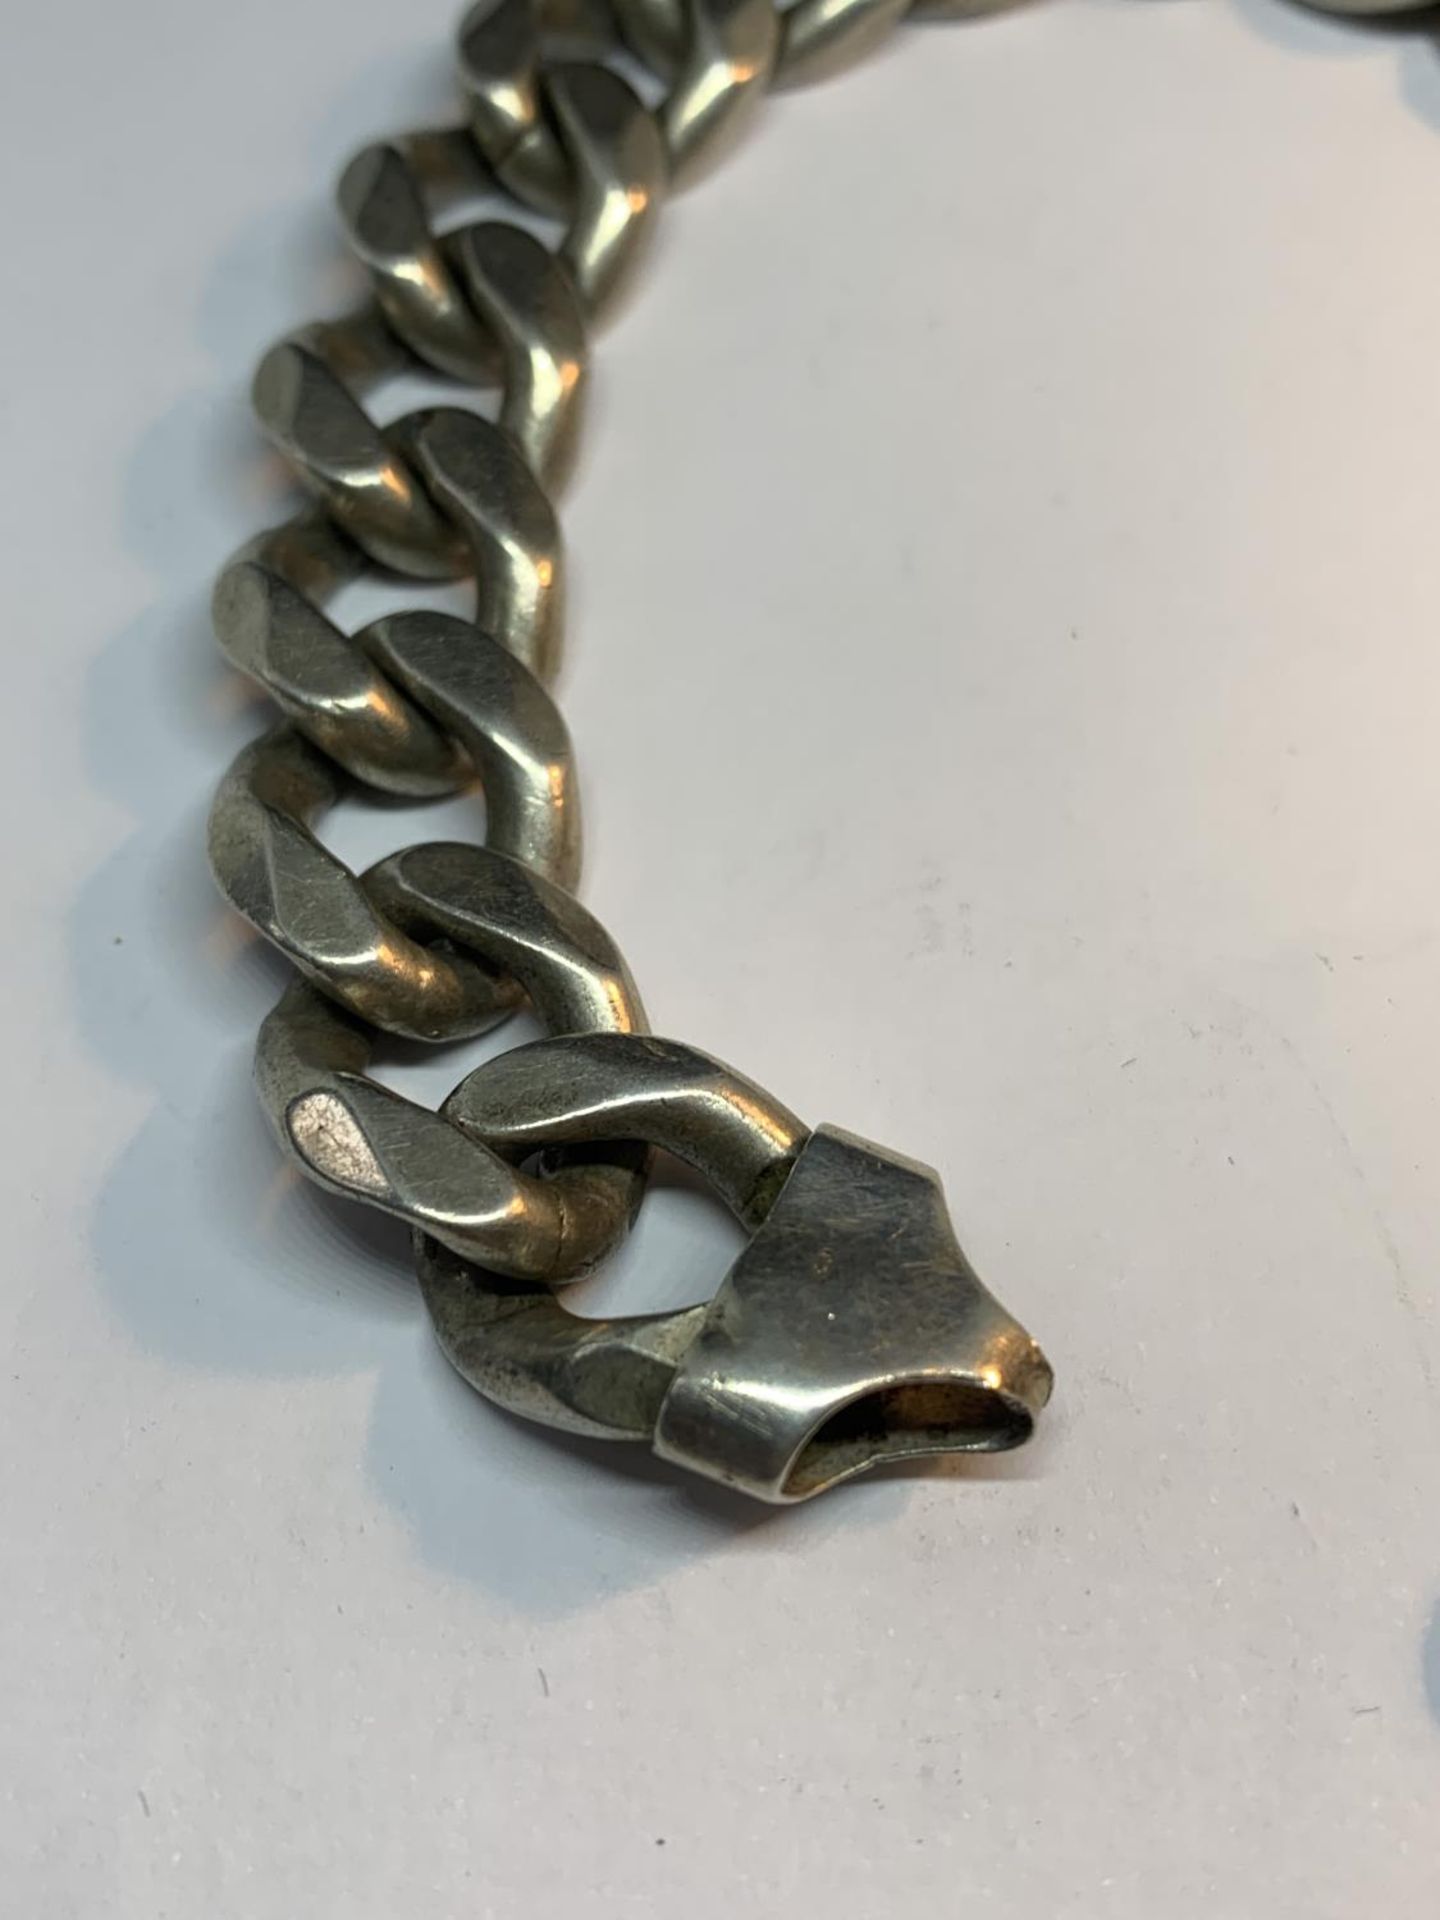 A VERY HEAVY SILVER FLAT LINK WRIST CHAIN - Image 2 of 4